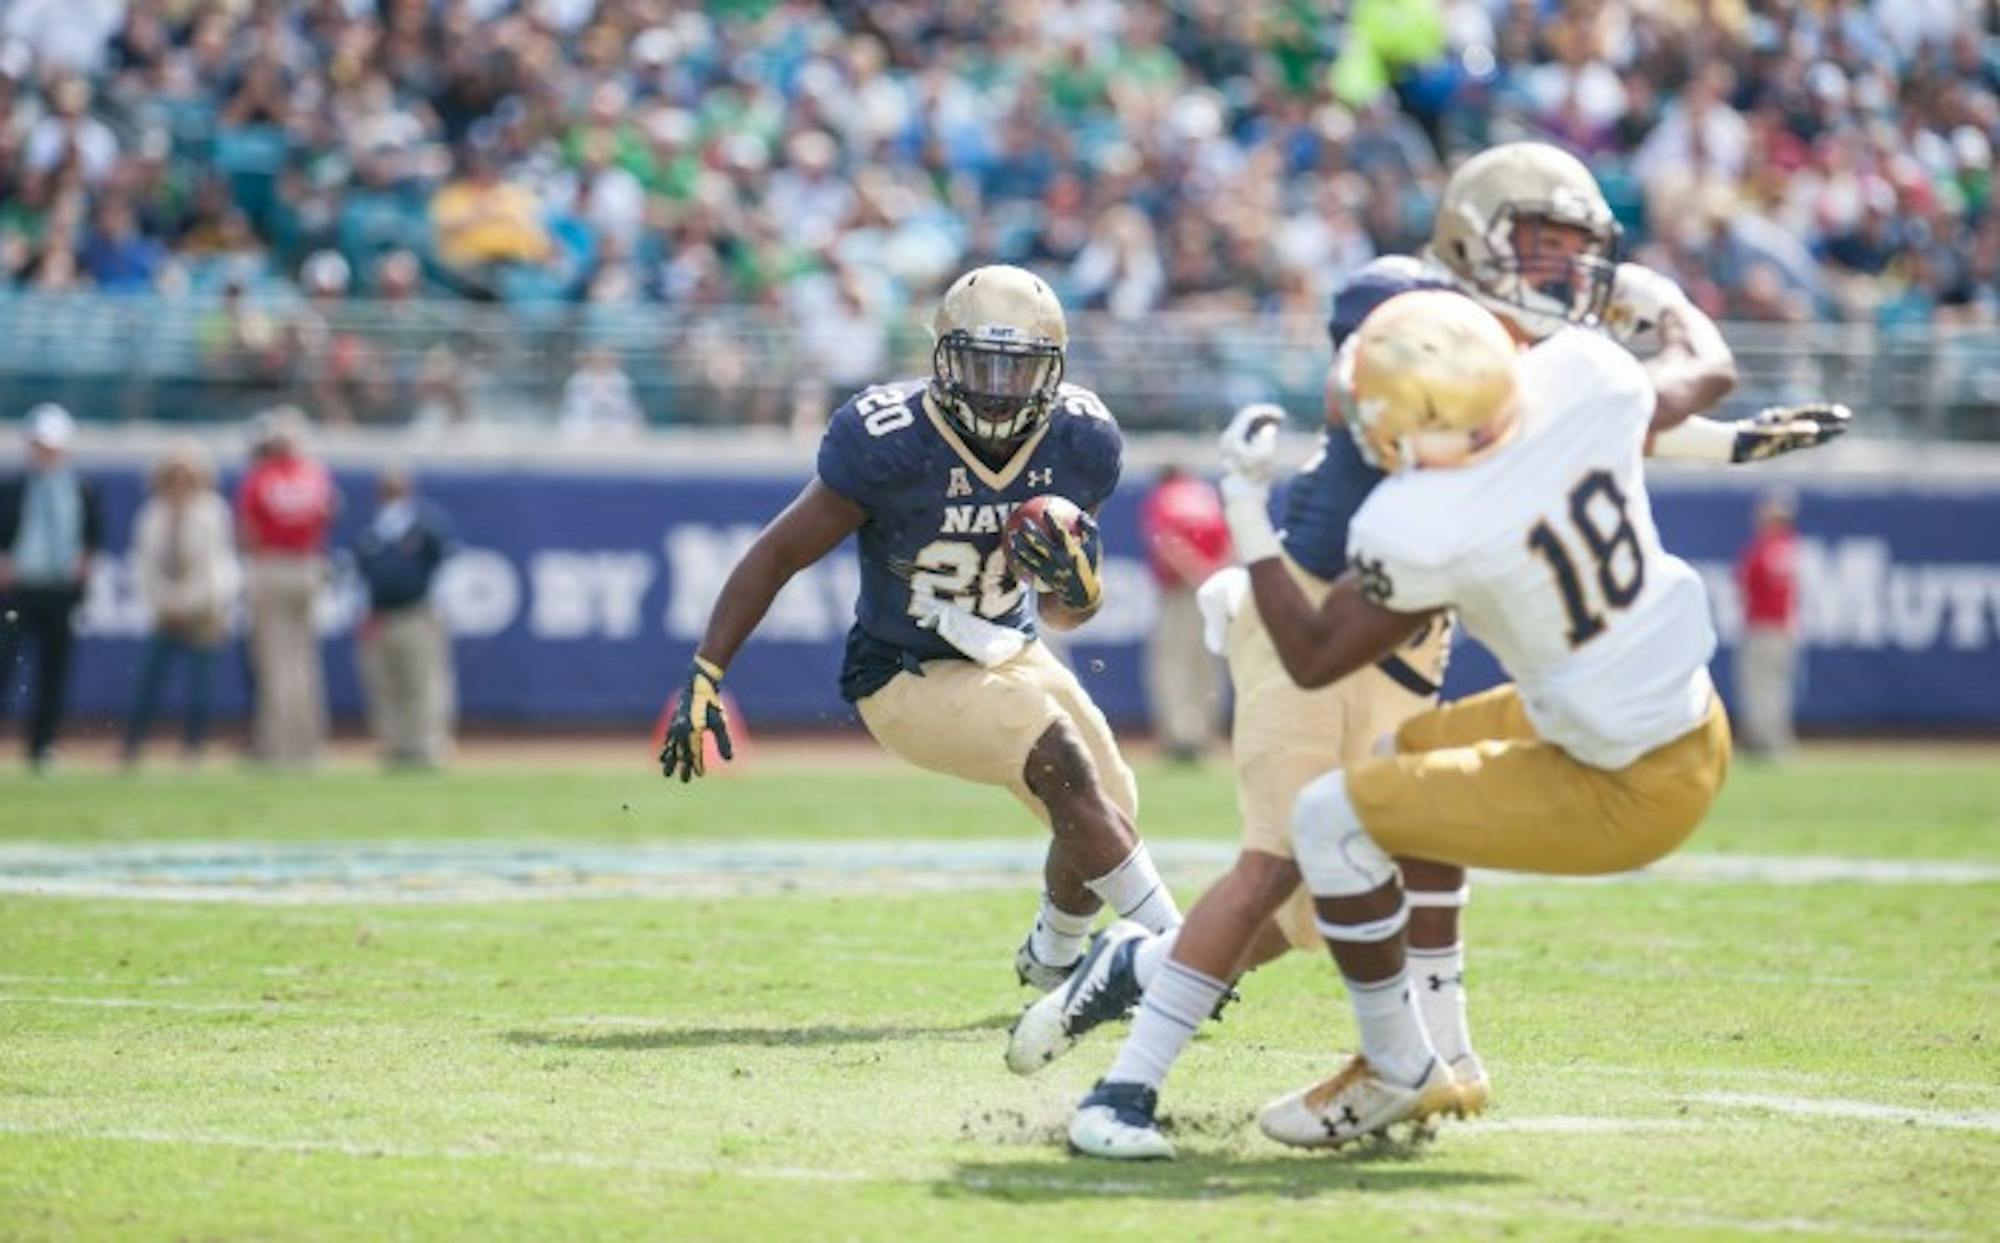 Senior Calvin Cass Jr. of Navy runs for a 37 yard touchdown to give Navy a 21-17 lead with 11:08 left in the 3rd Quarter. ND Freshmen CB Troy Pride Jr. on receiving end of a hard block.